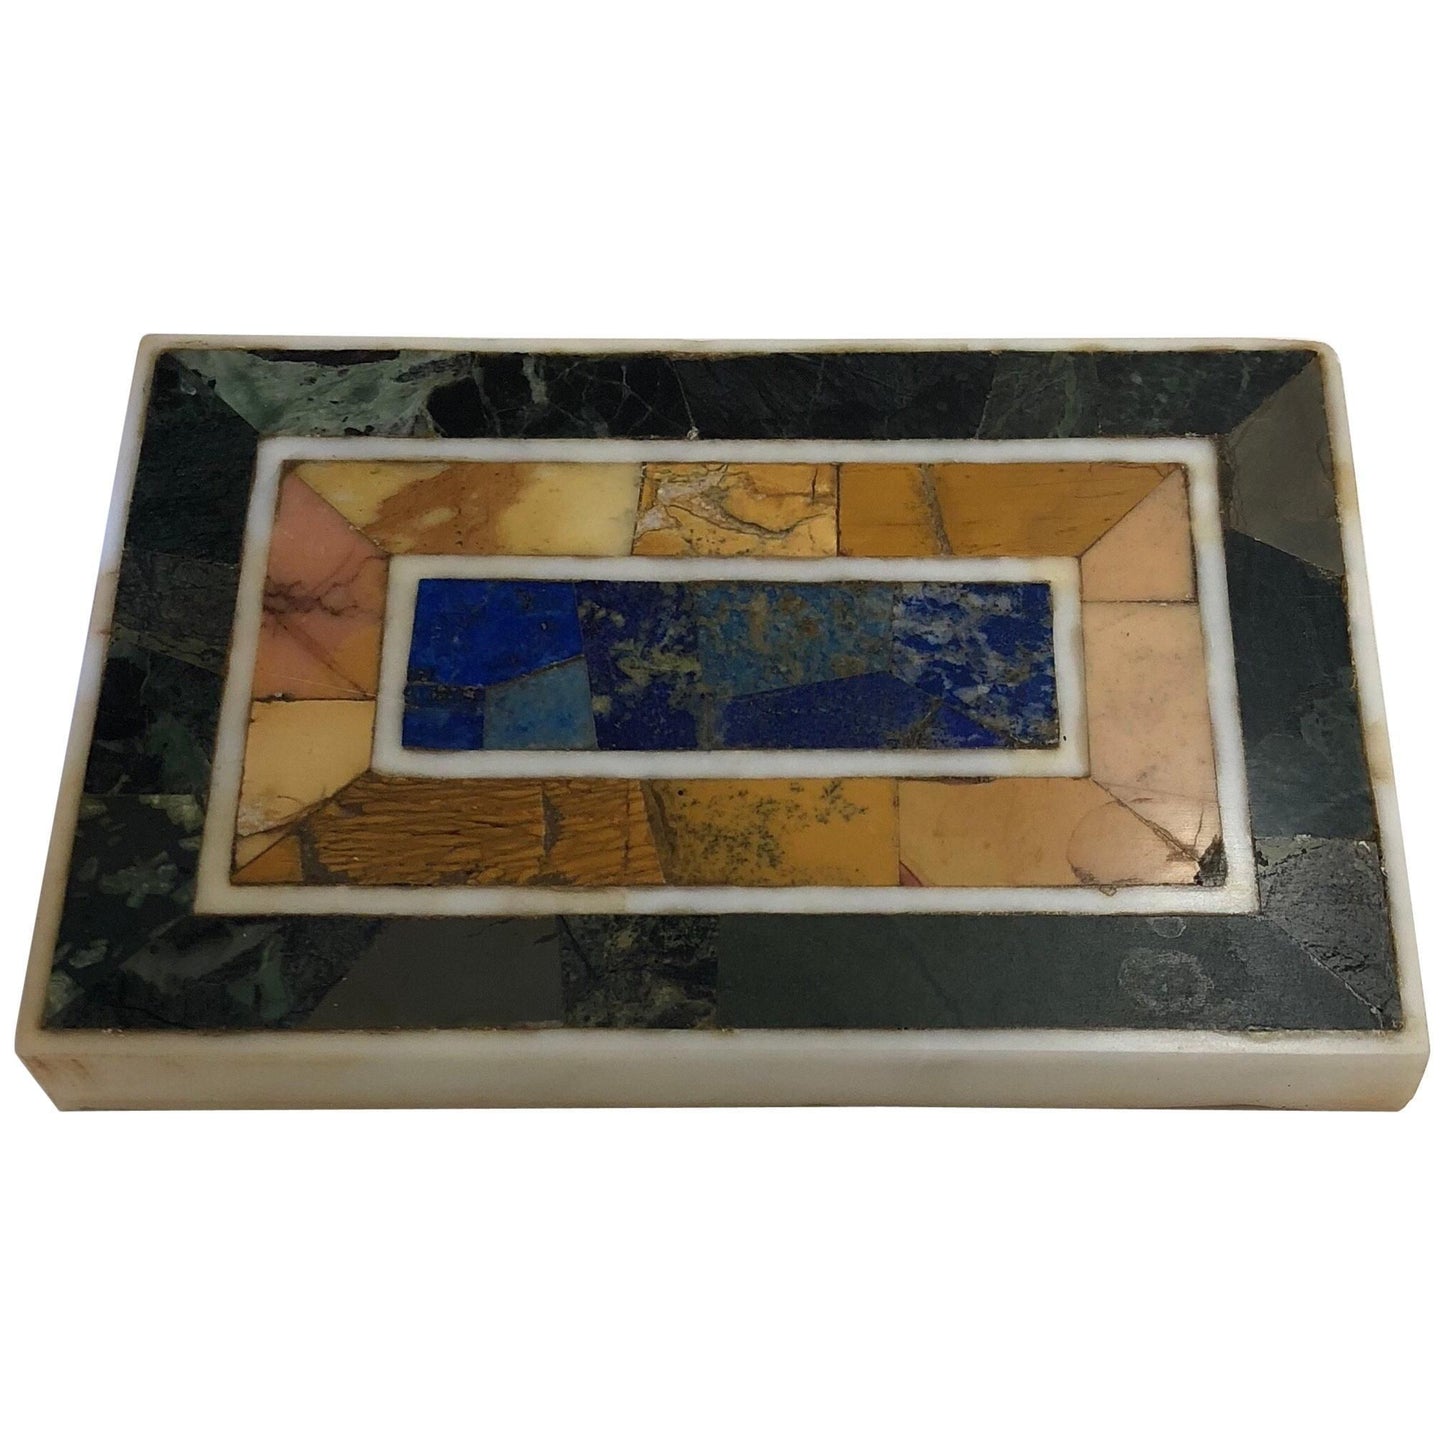 Grand Tour Inlaid Marble Specimen Paperweight, Early 20th Century